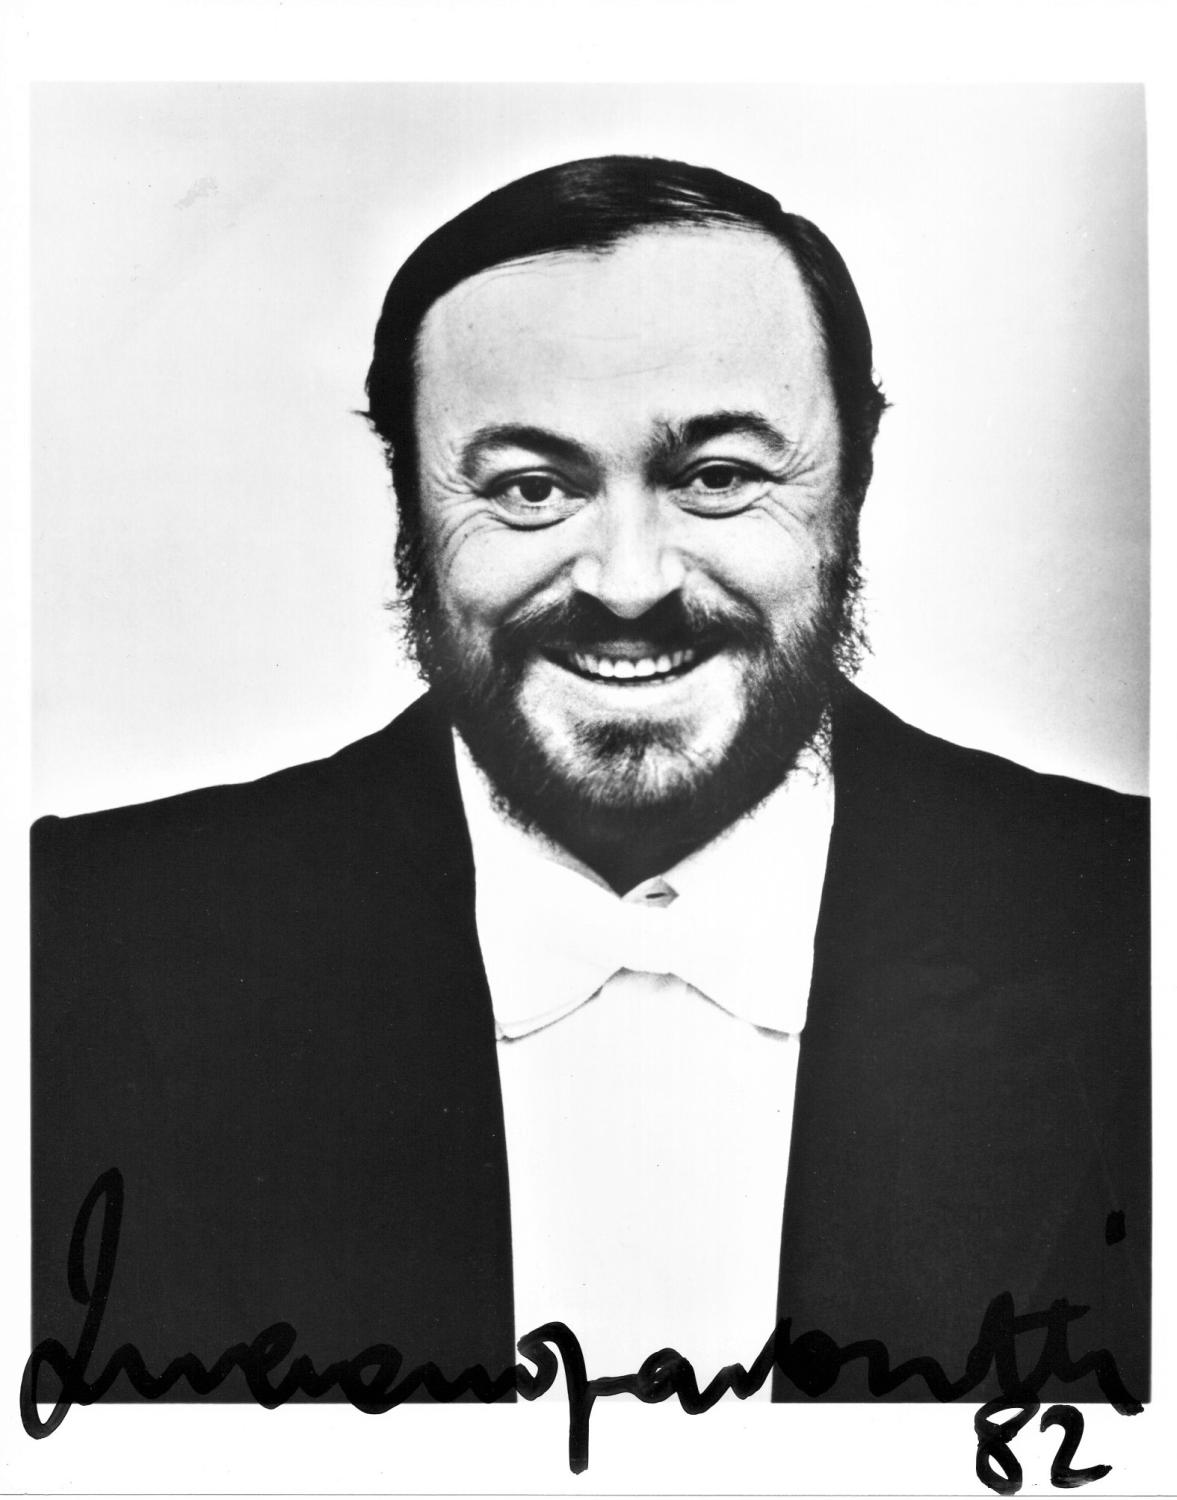 AUTOGRAPHED PHOTOGRAPH OF LUCIANO PAVAROTTI Pavarotti, Luciano [Fine] [Softcover] Black and white photograph of Pavarotti boldly SIGNED by the famed singer in felt-tip pen. The signed photo was a premium given to some Lyric Opera  Friends  who donated during the 1982 Operathon. Accompanying the photo is a letter from the Operathon Committee explaining that the autographed photo was a substitute for a promised signed Pavarotti album, which was not available because the singer had cancelled his scheduled Chicago performance, as he was wont to do. Also included is the original envelope in which the photo was mailed. All 3 items are in excellent condition. Size: 10  X 8 